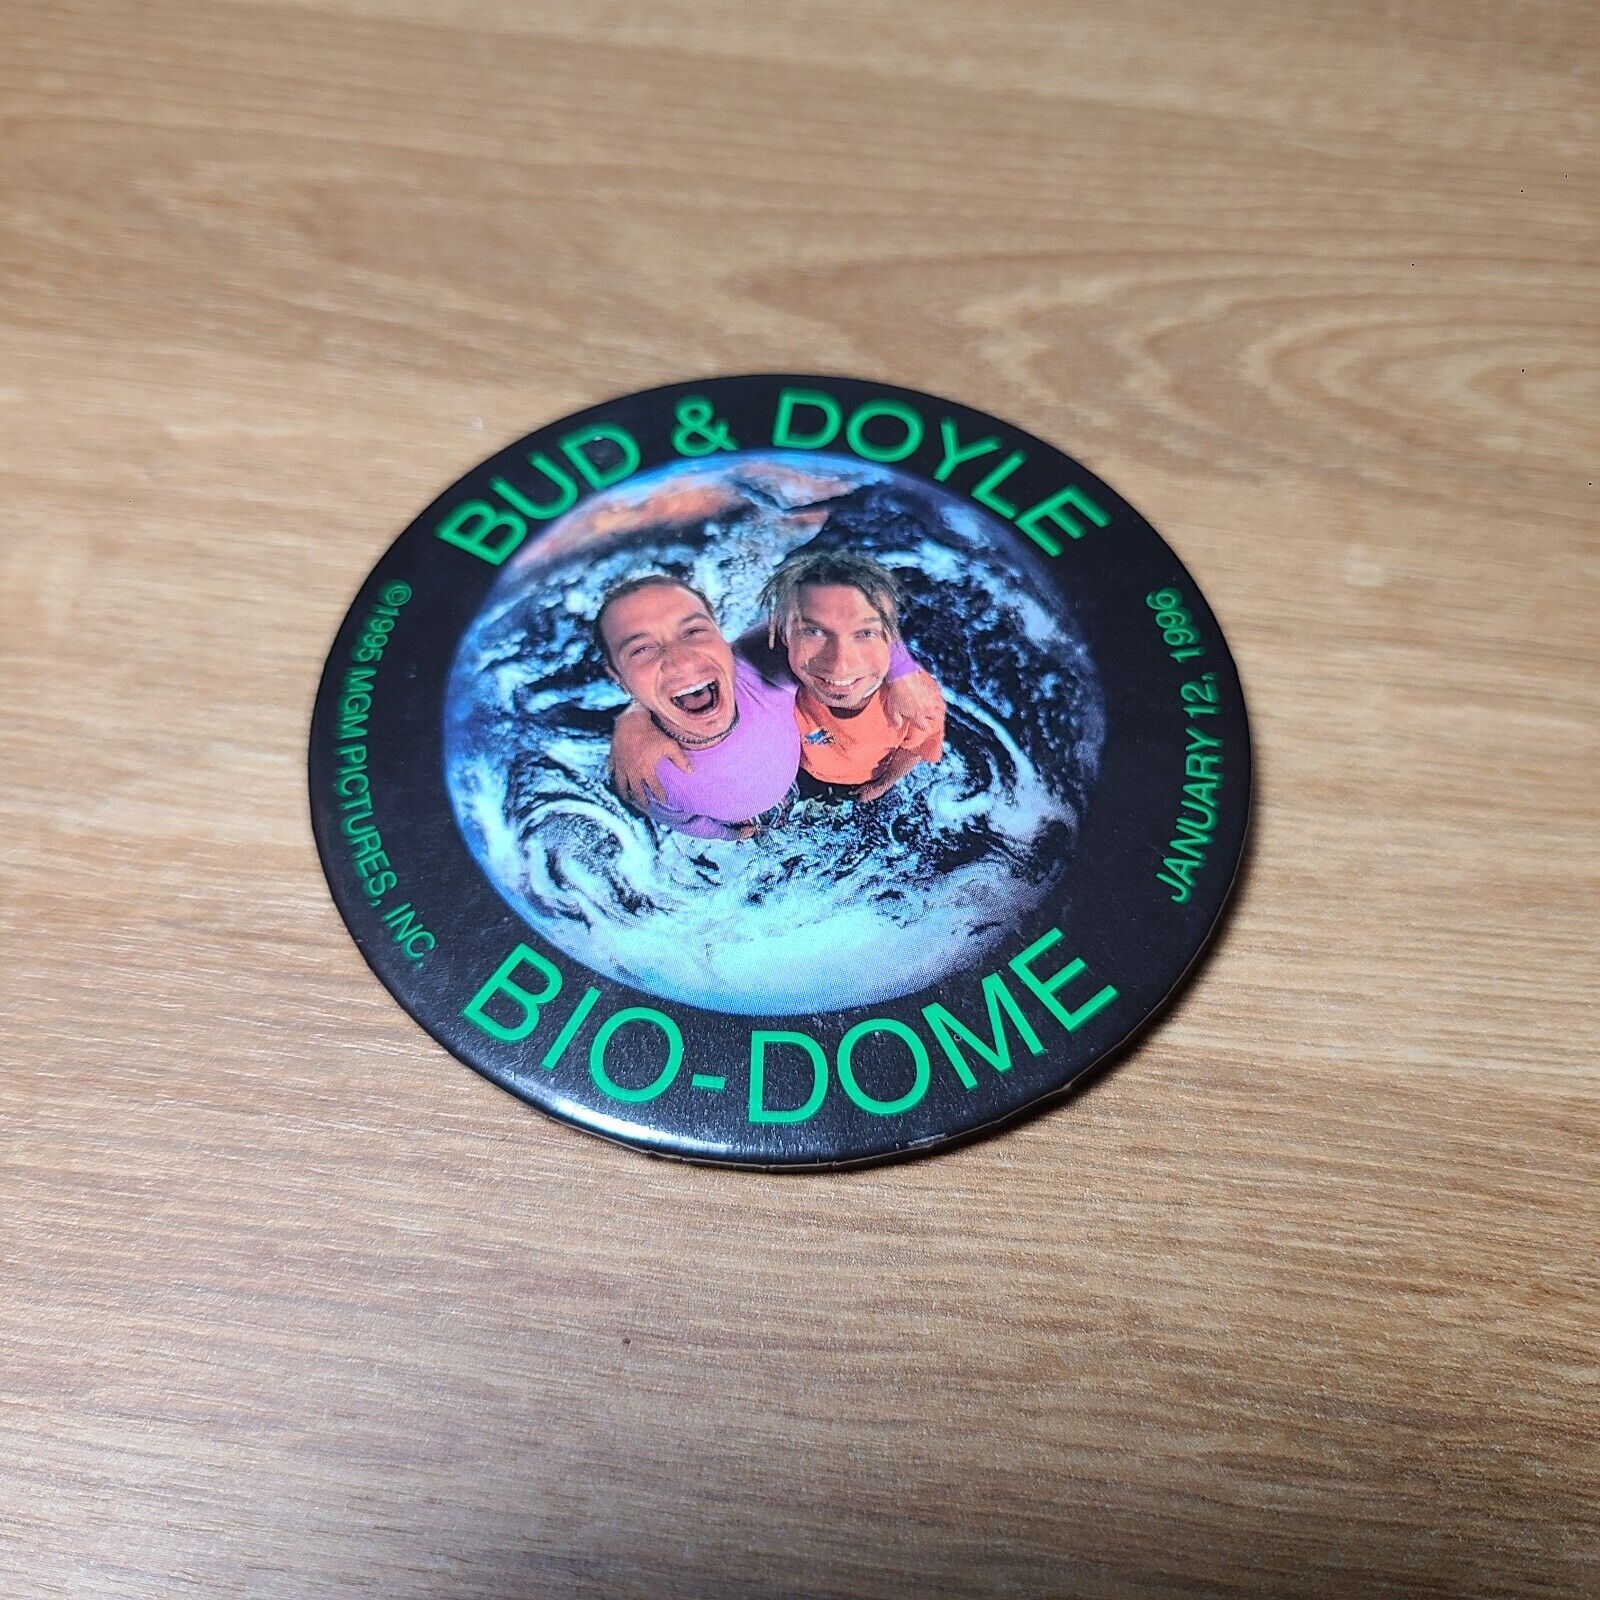 Bud and Doyle Bio-Dome Movie Promo Button VTG 1995 MGM PICTURES PINBACK 3\